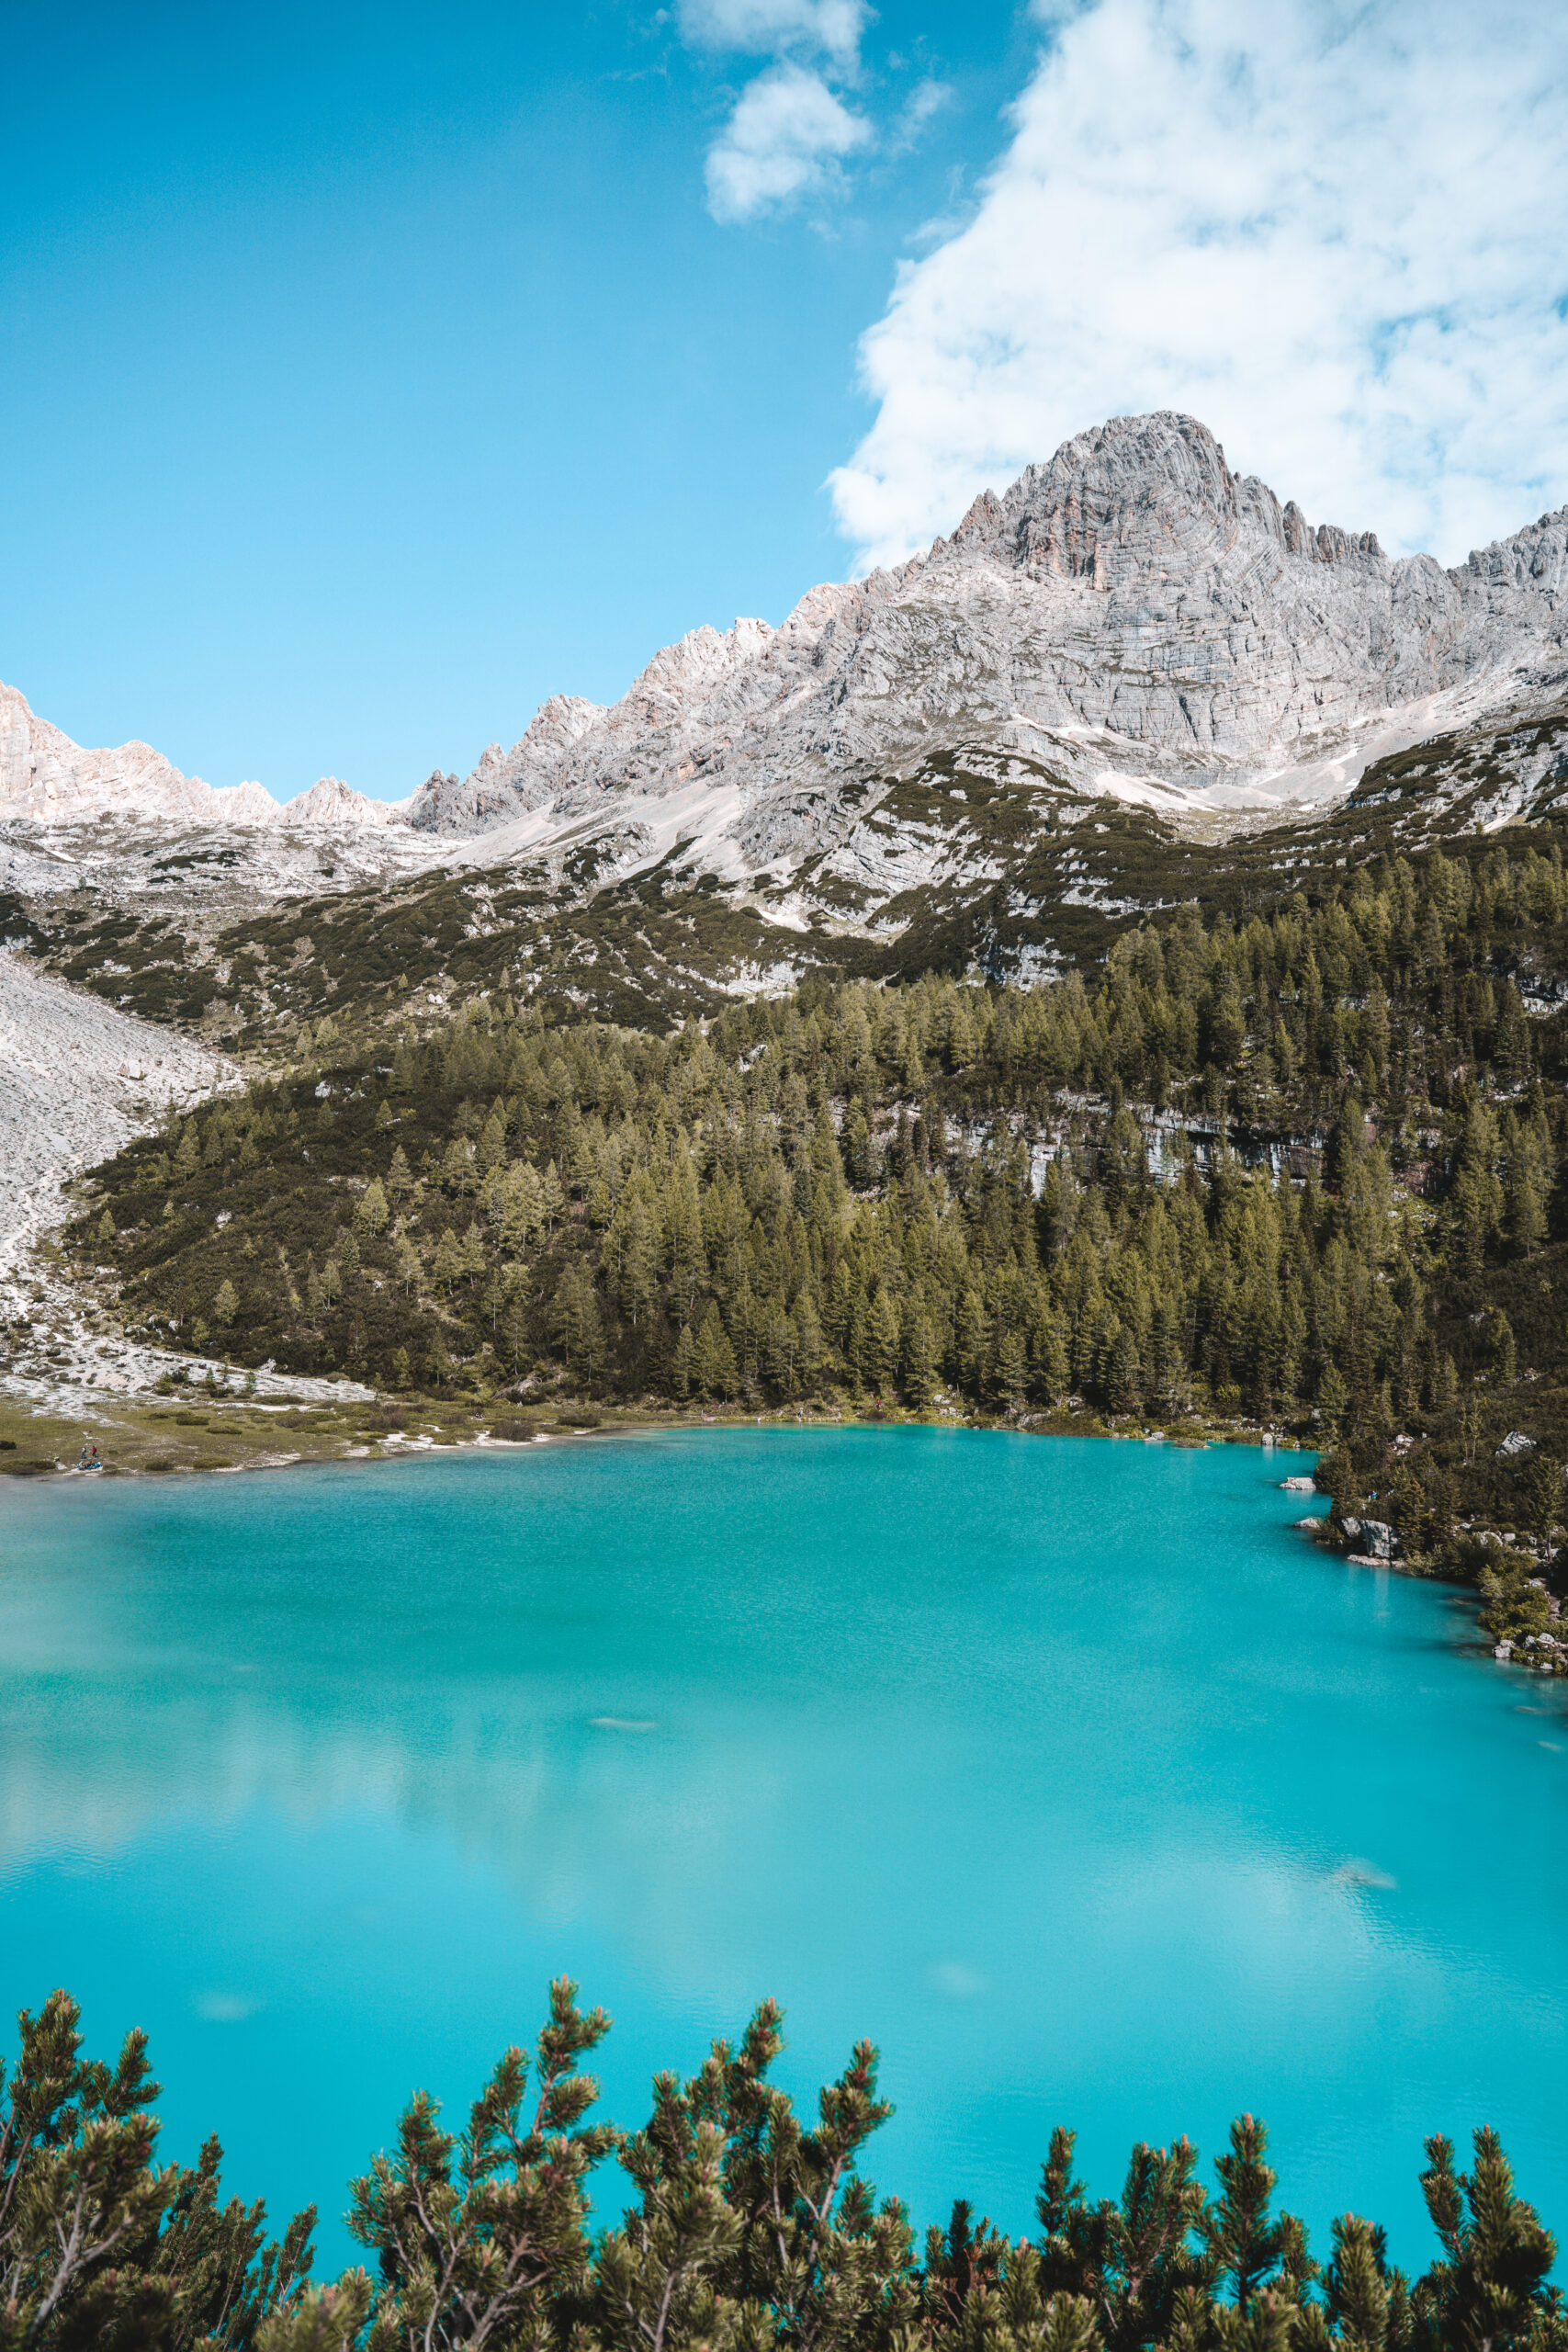 Hike to Lago di Sorapis - everything you need to know